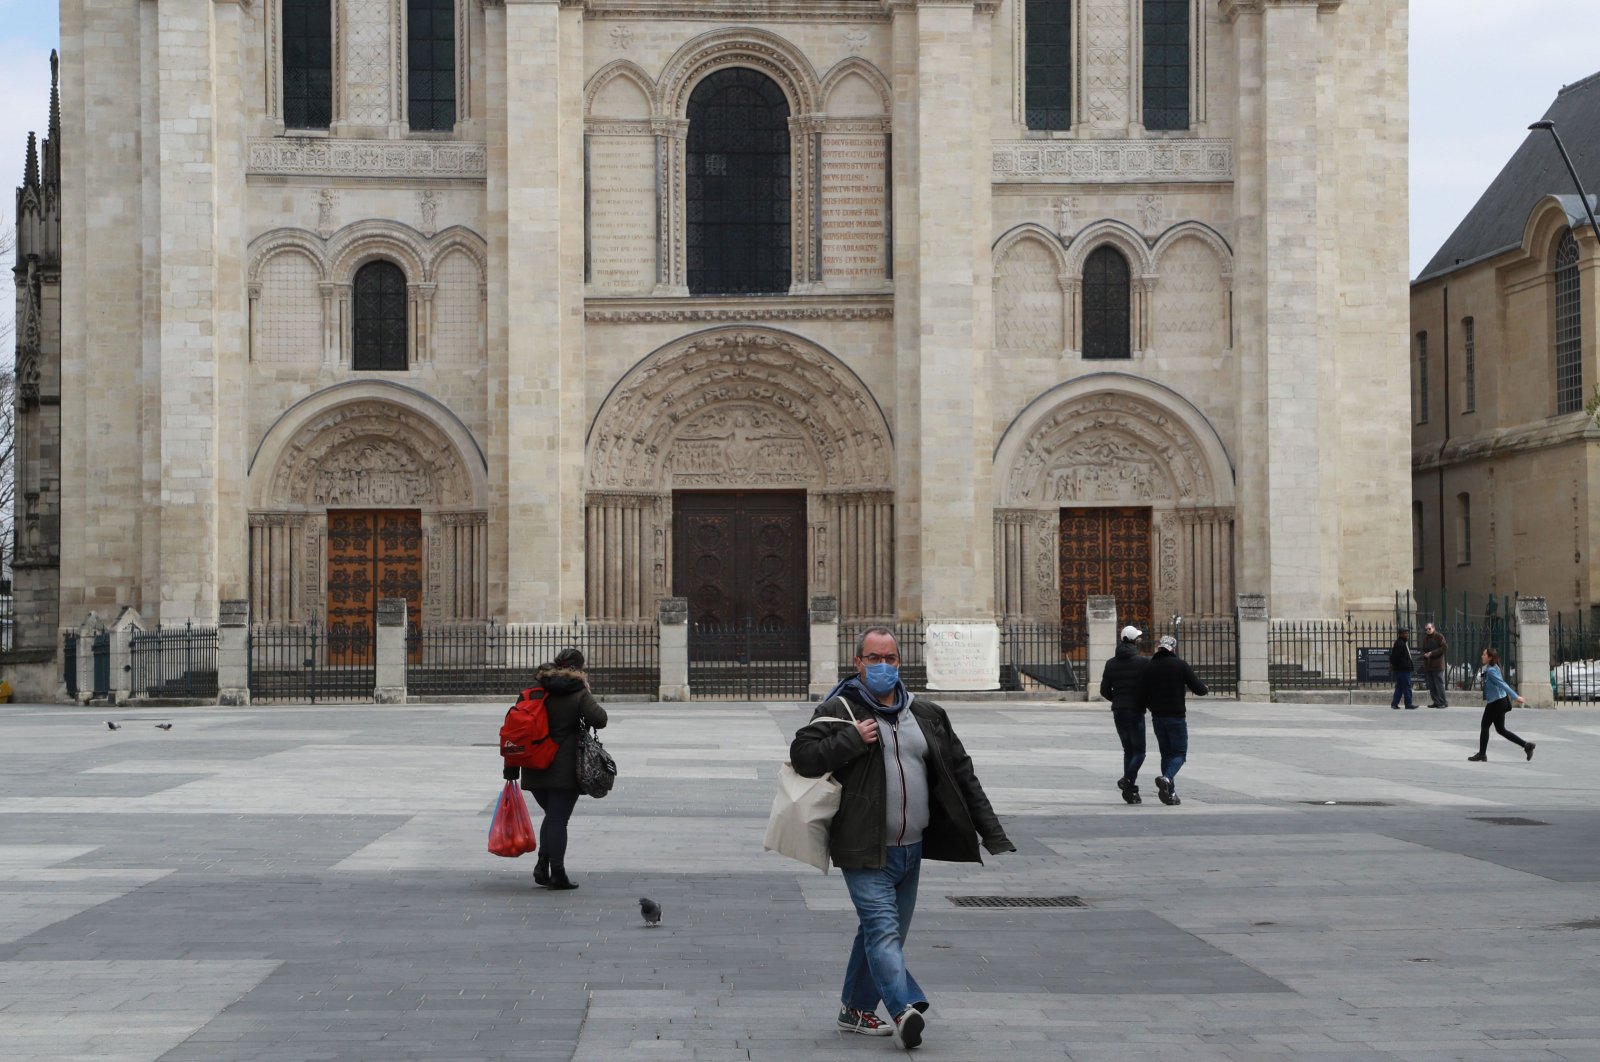 A man wearing a protective face mask walks in front of Saint-Denis Basilica on the seventeenth day of lockdown aimed at curbing the spread of COVID-19 in Saint-Denis, Paris on April 2, 2020. (AFP Photo)